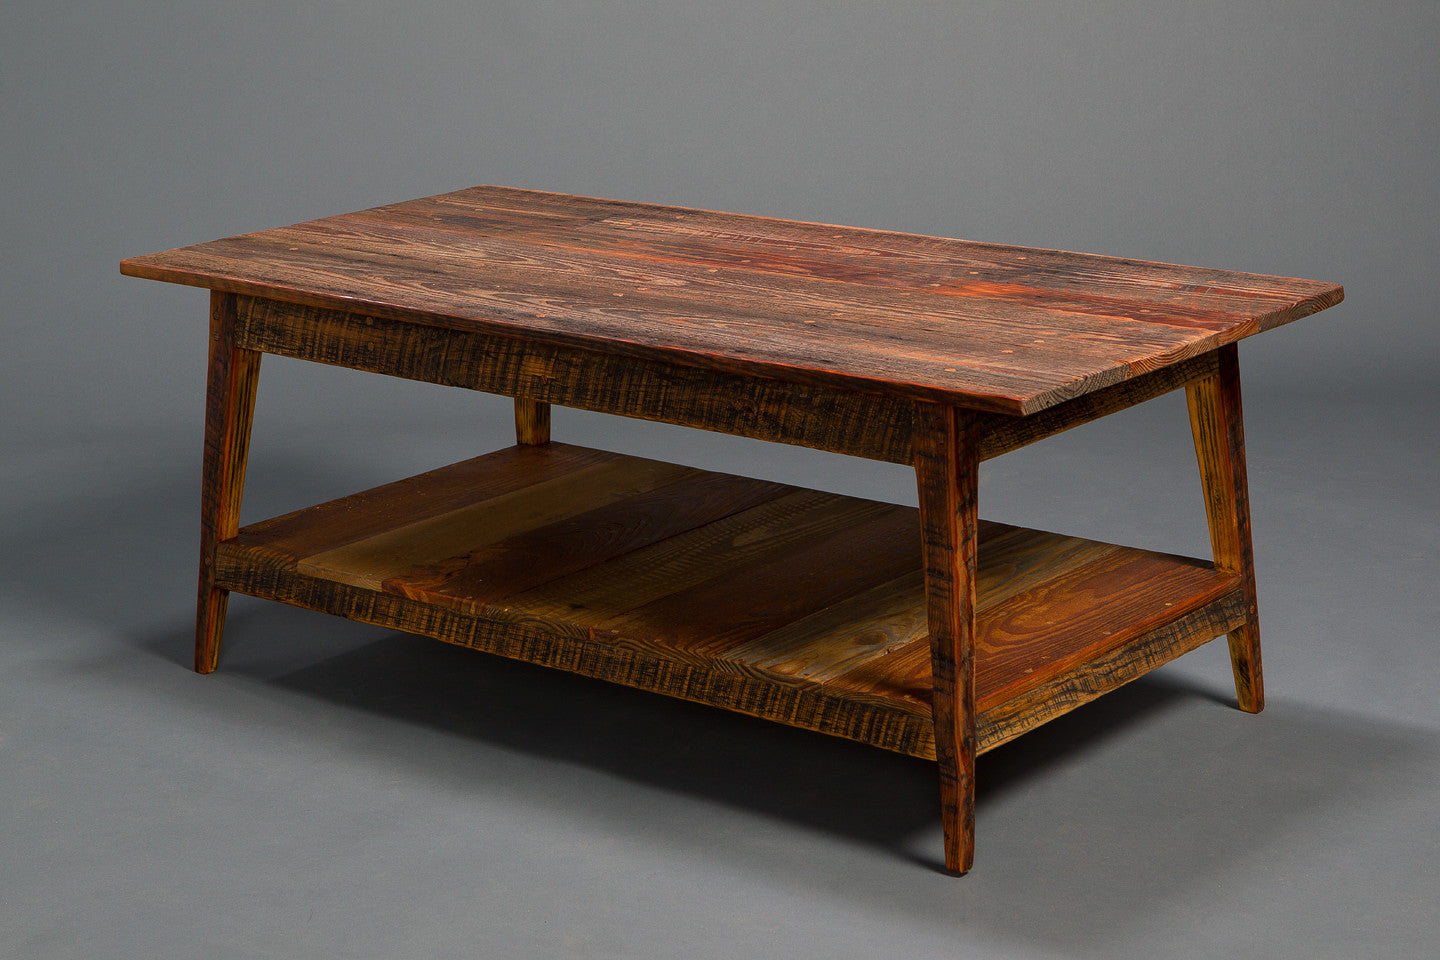 Signature Coffee Table with Shelf